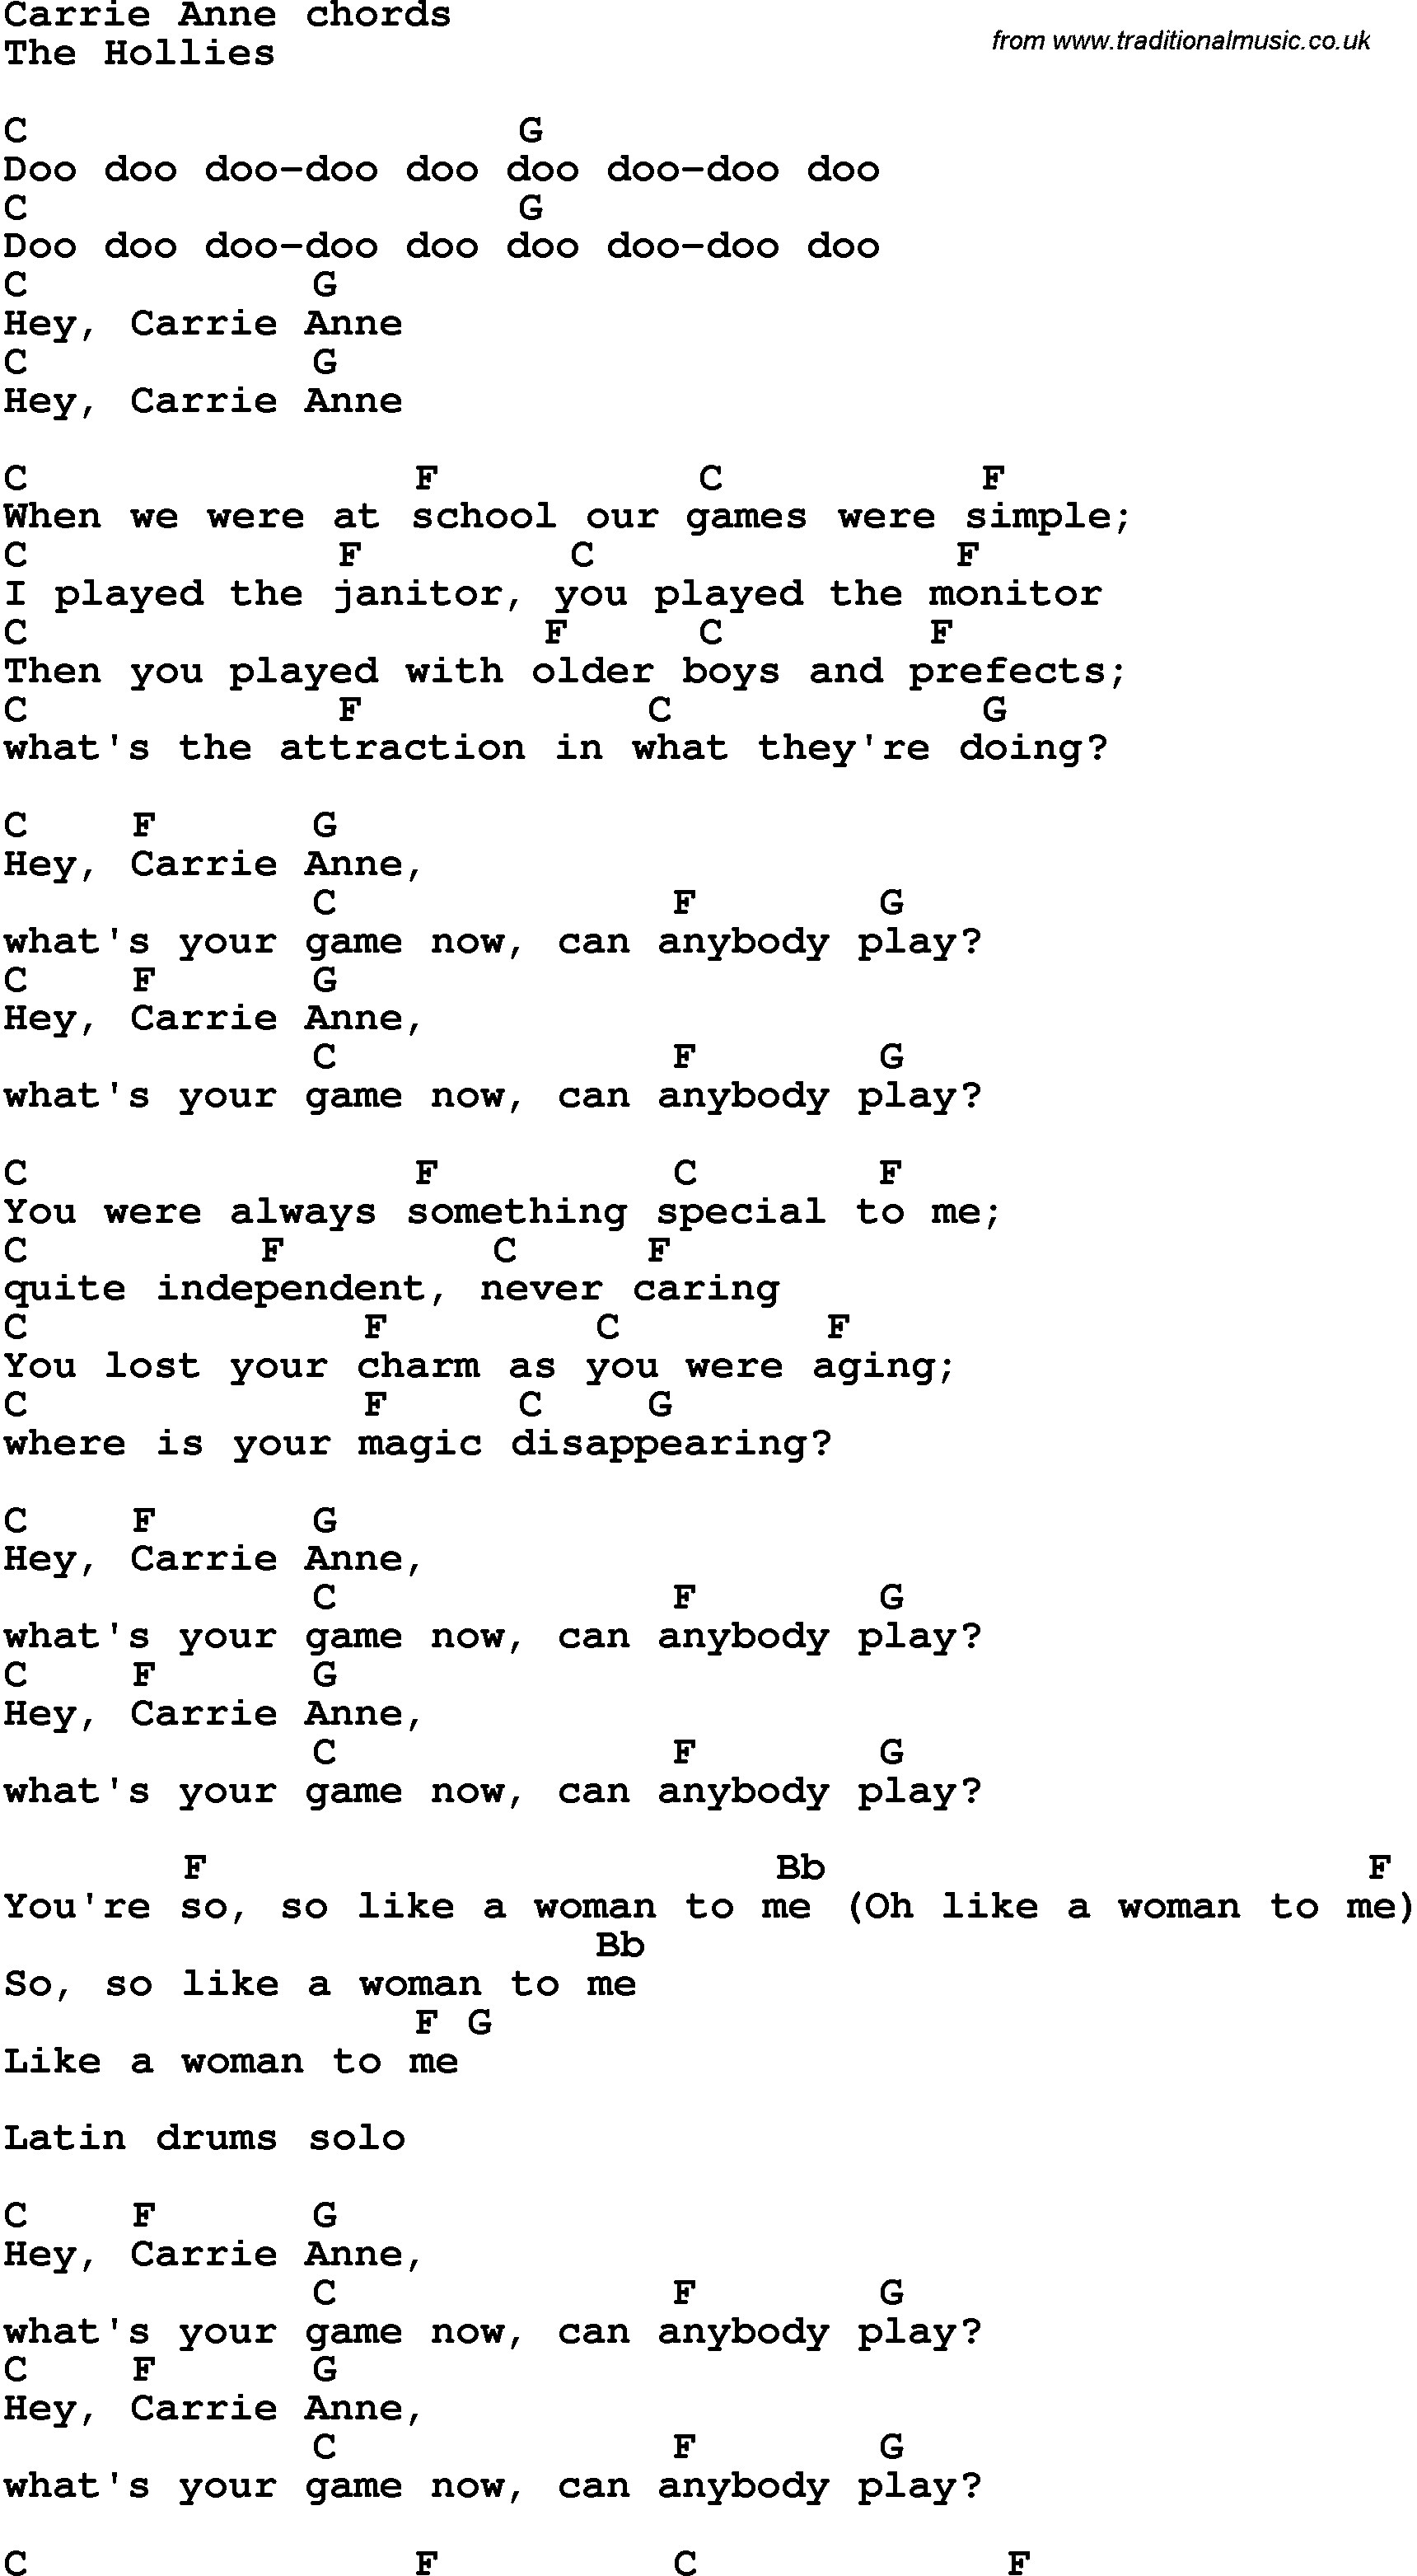 Song Lyrics with guitar chords for Carrie Anne